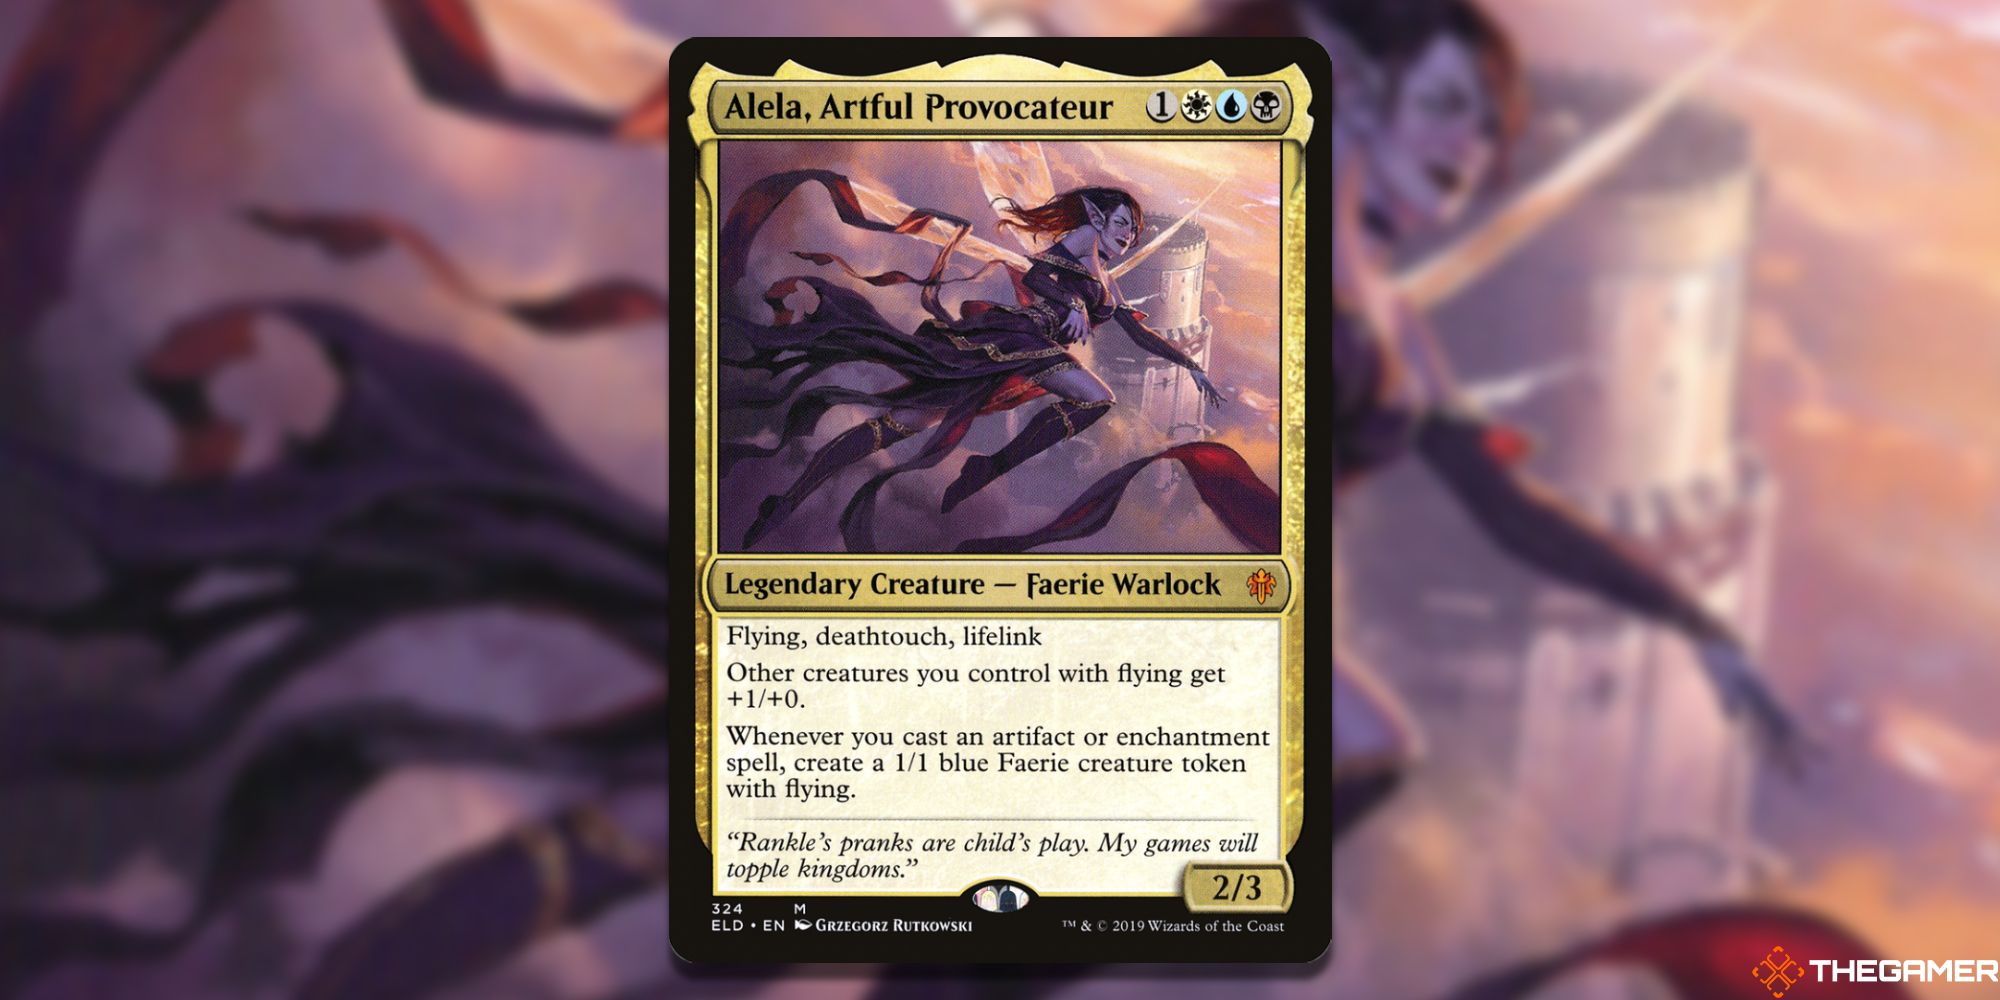 Image of the Alela, Artful Provocateur card in Magic: The Gathering, with art by Grzegorz Rutkowski